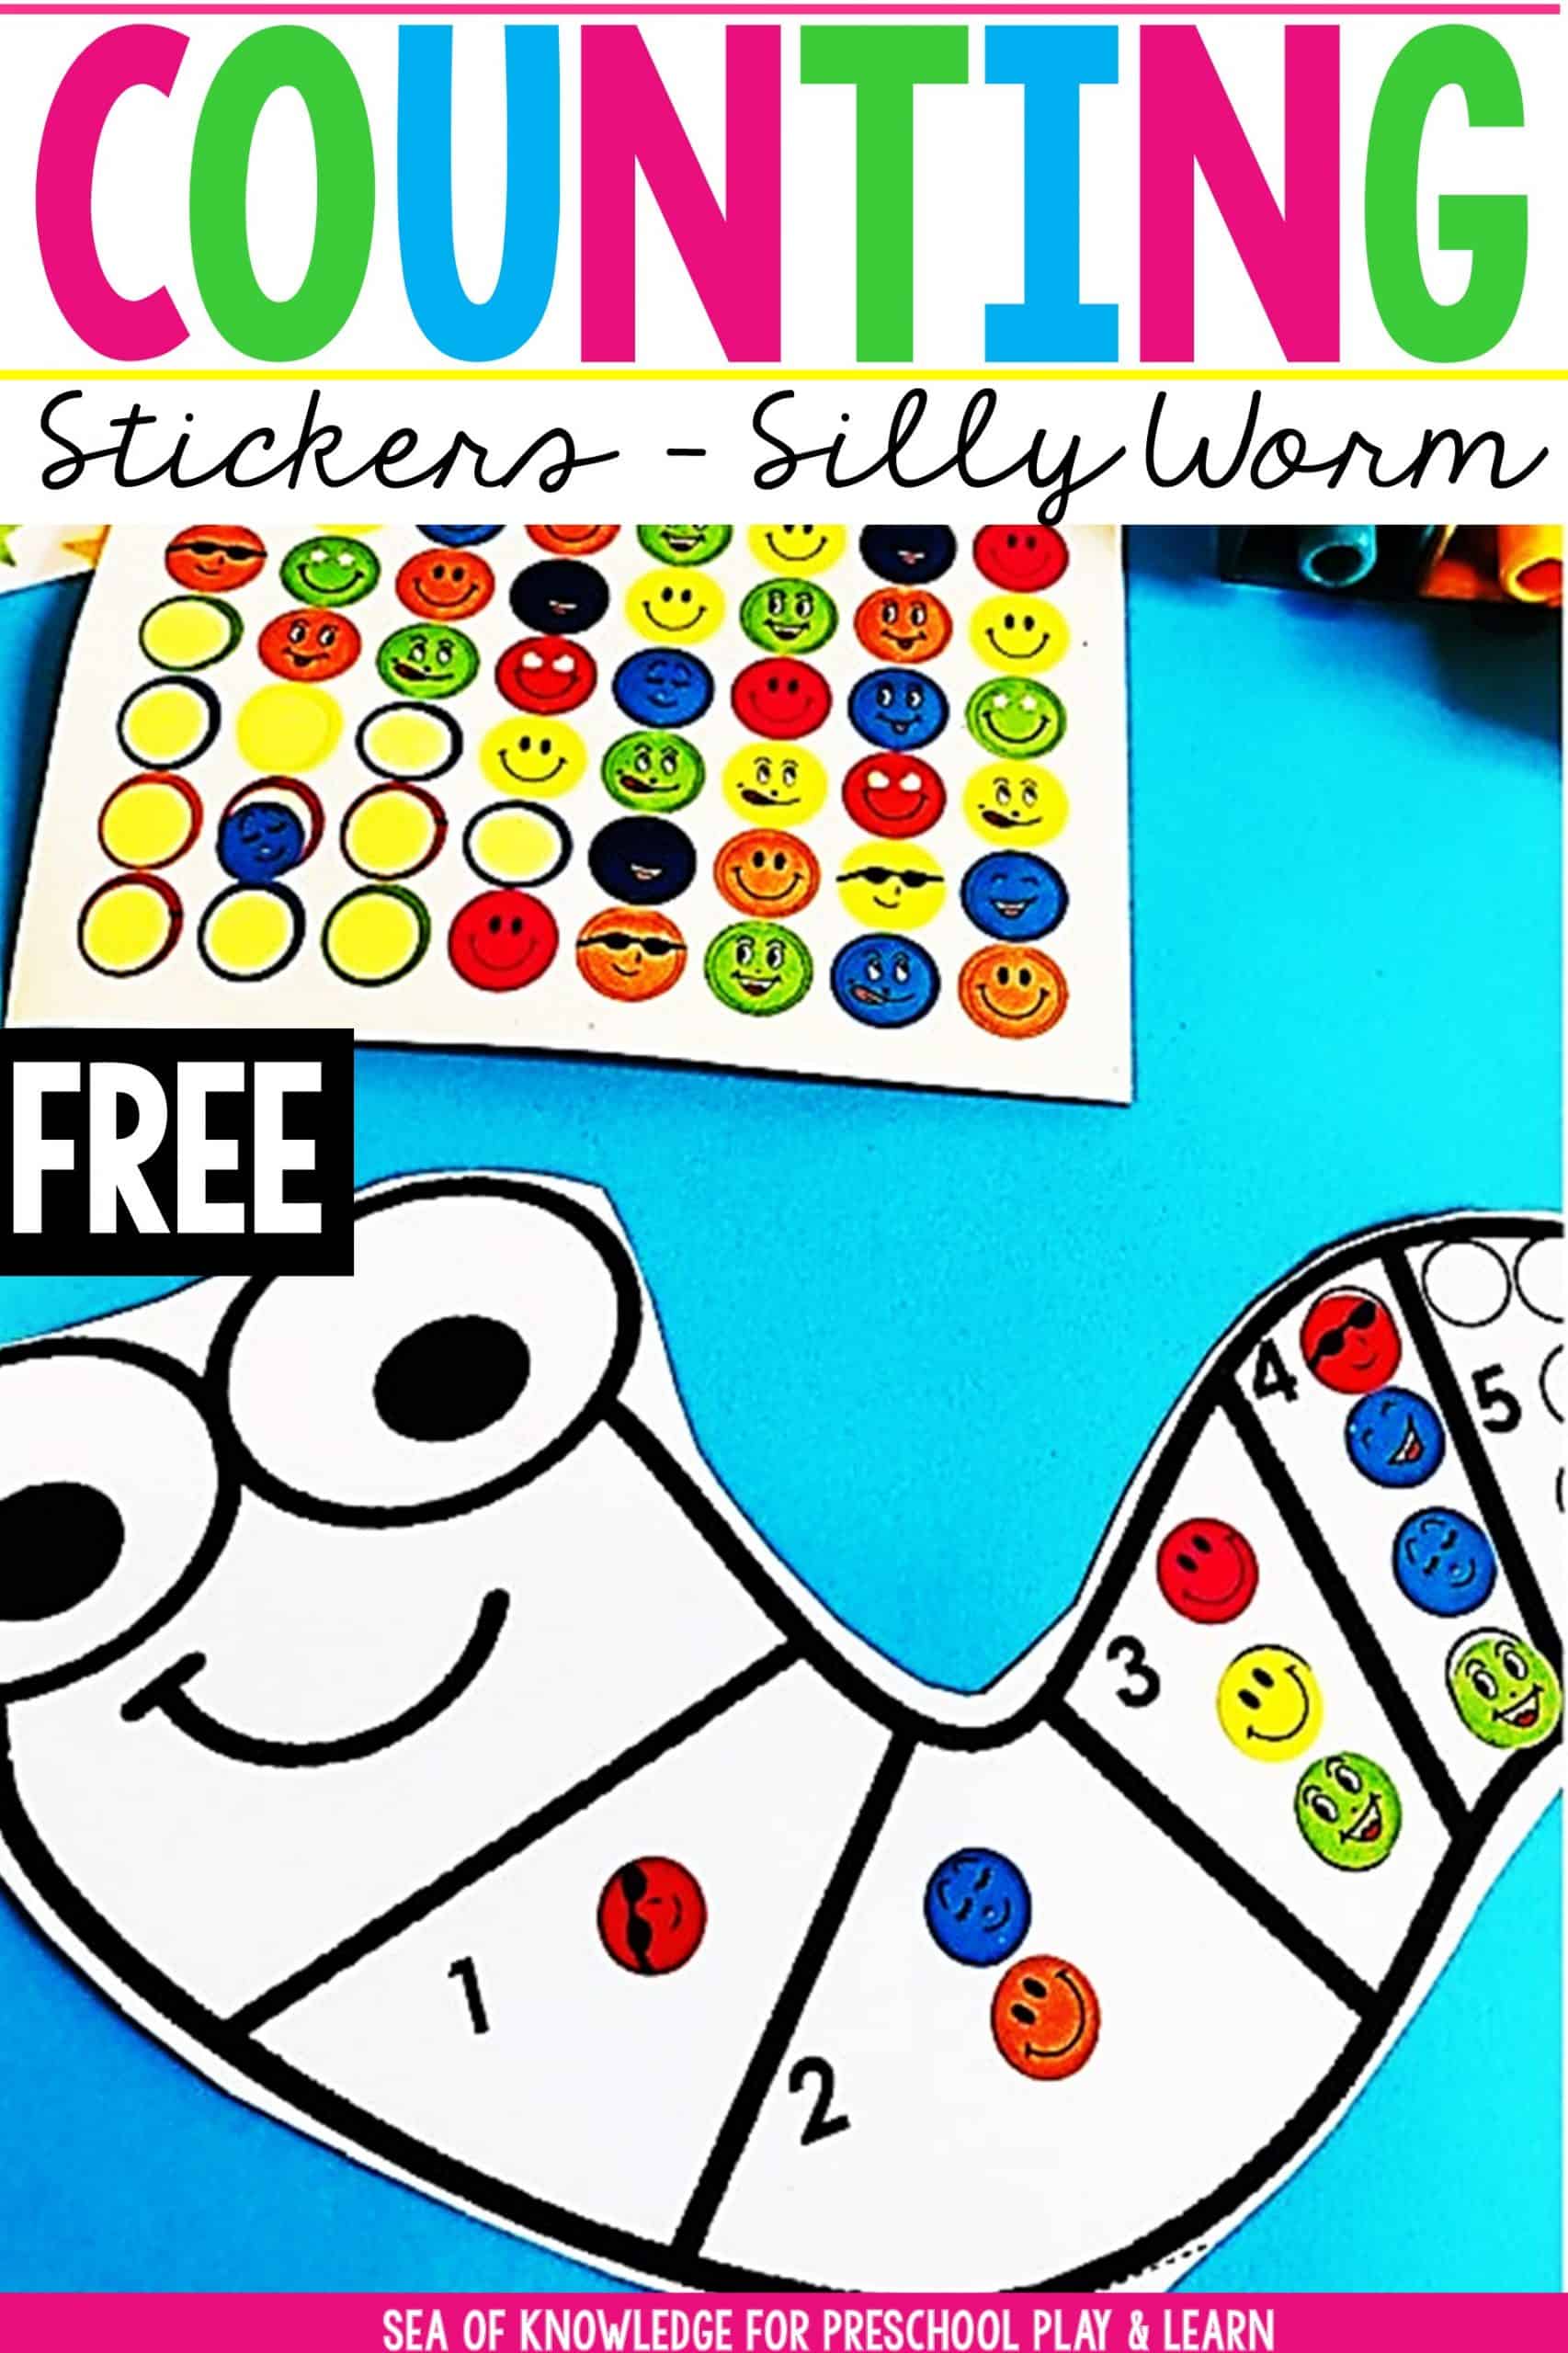 This Counting 1 to 10 Dot Stickers Silly Worms activity will sure be a hit with your little learners! Looking for a fun way to get kids to count and show their numbers? These fun fun silly worms themed printable cards are perfect for that. Learners will identify the number on each section and then place that many dot stickers to fill the 'dots on their silly worms'.